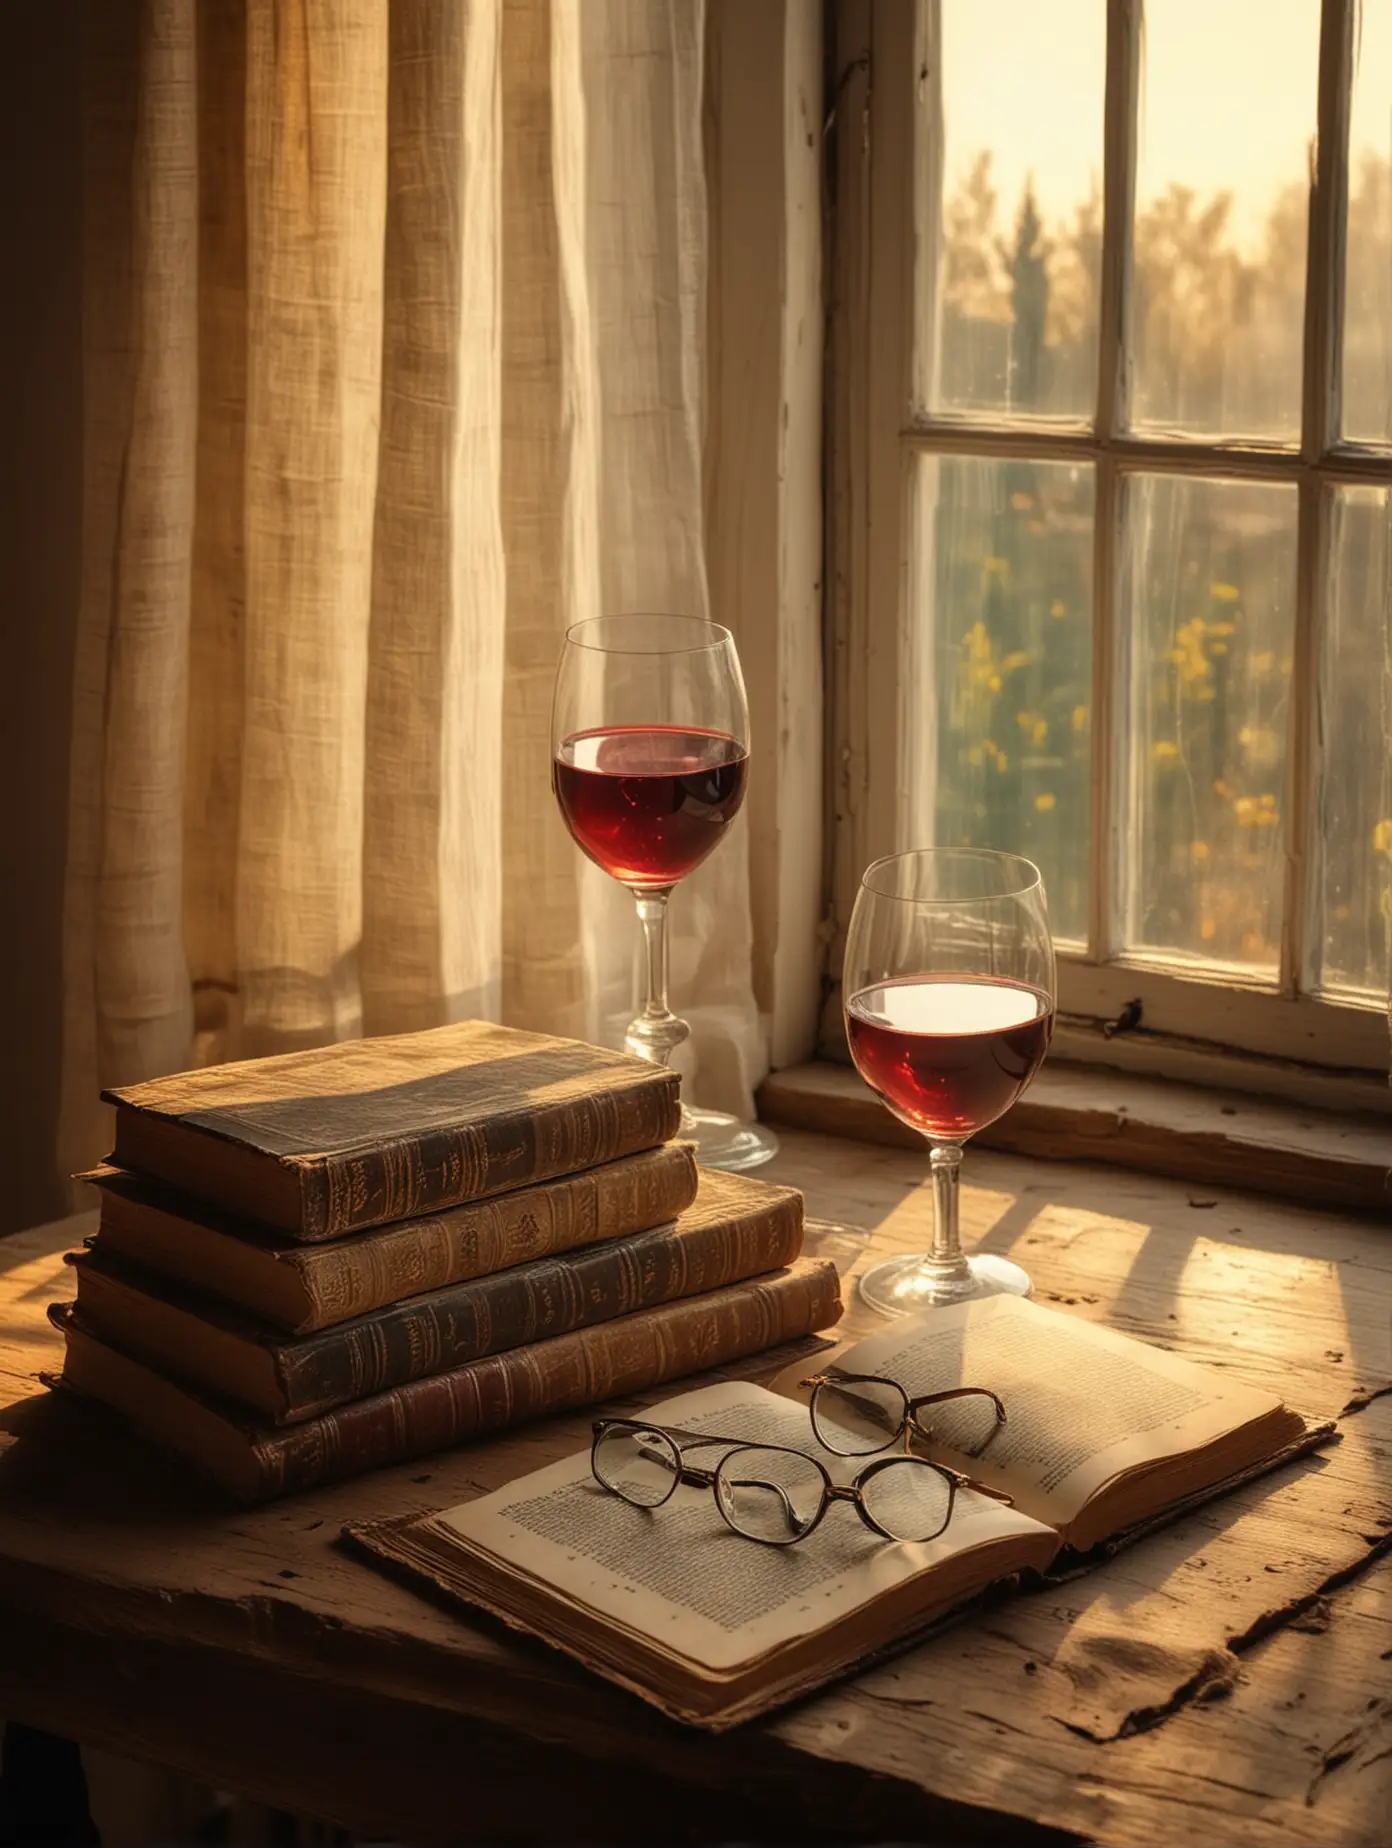 Antique Books and Glasses in Van Gogh Style with Morning Sunlight